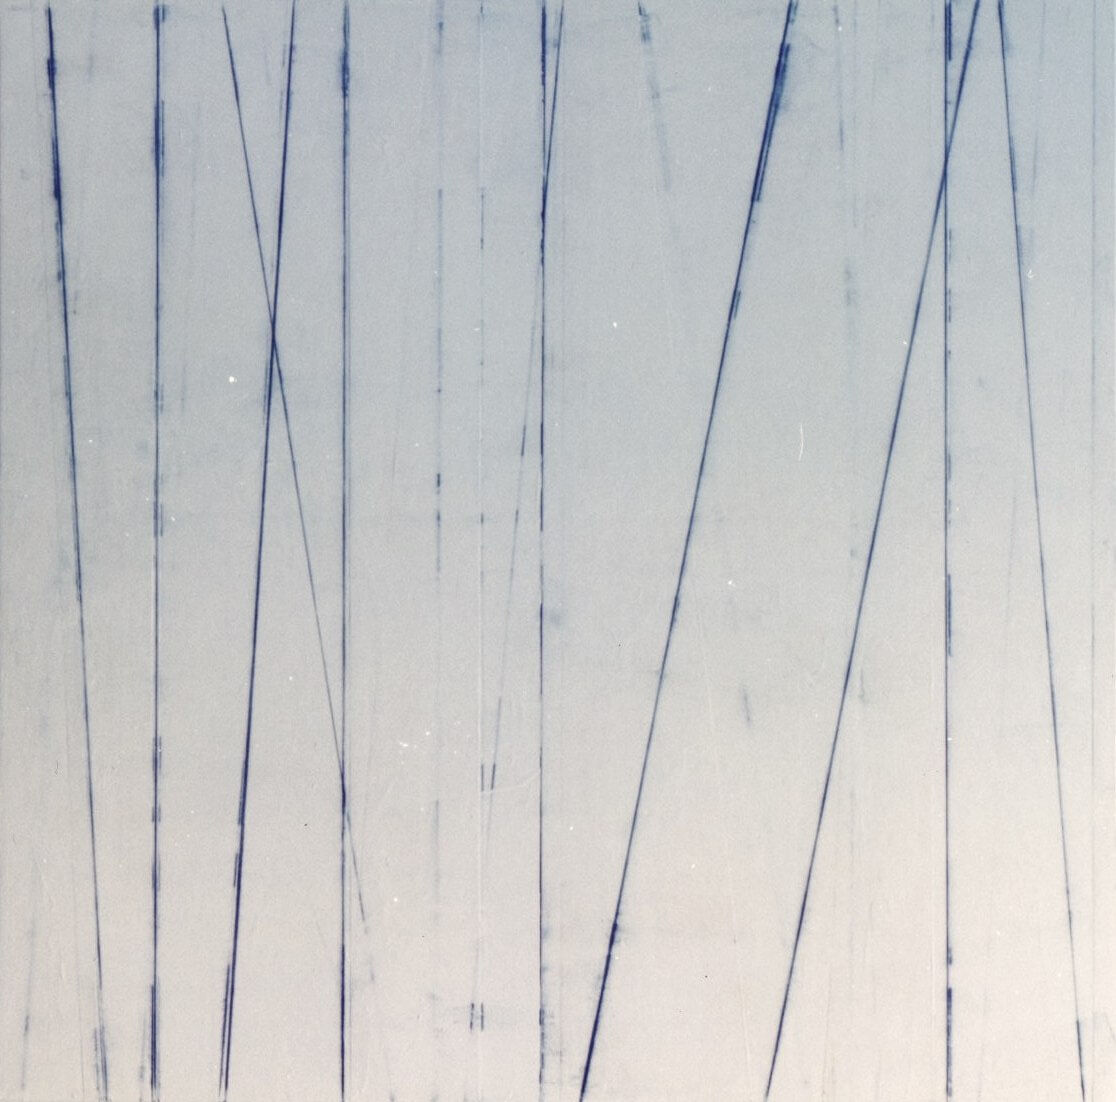 Untitled (Blue lines) #3